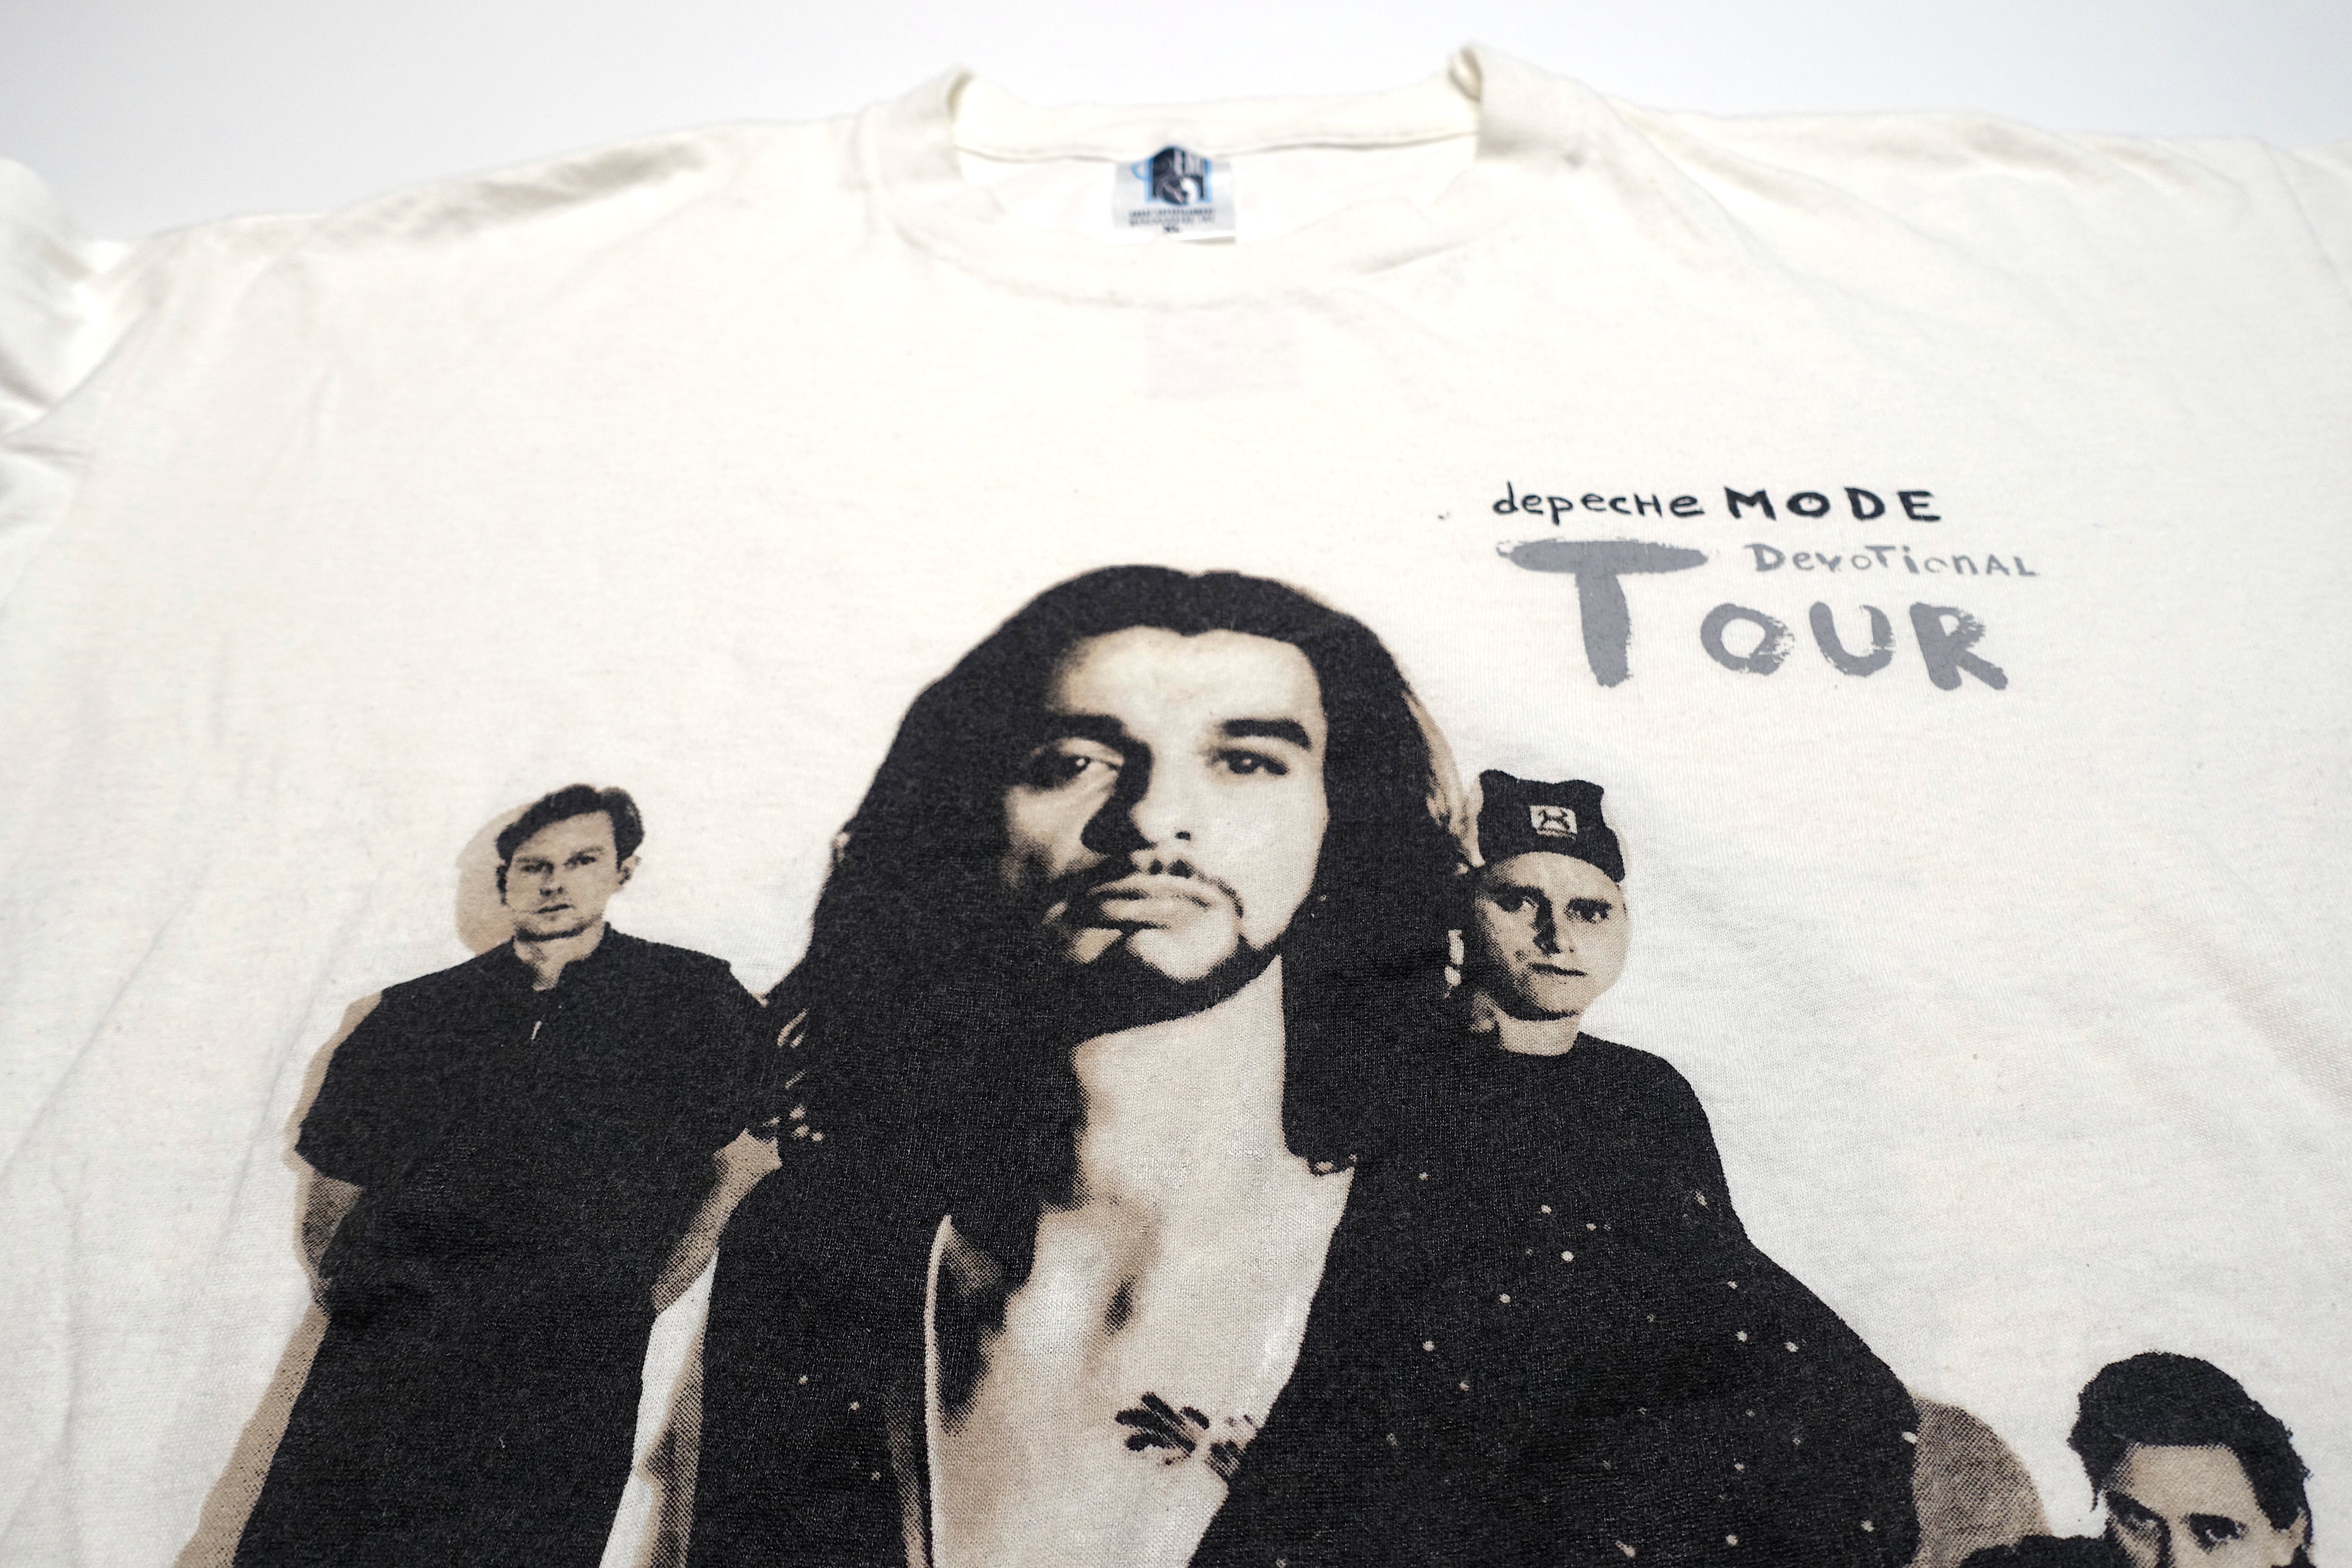 Depeche Mode – Songs Of Faith And Devotion 1993 North American Tour Shirt Size XL